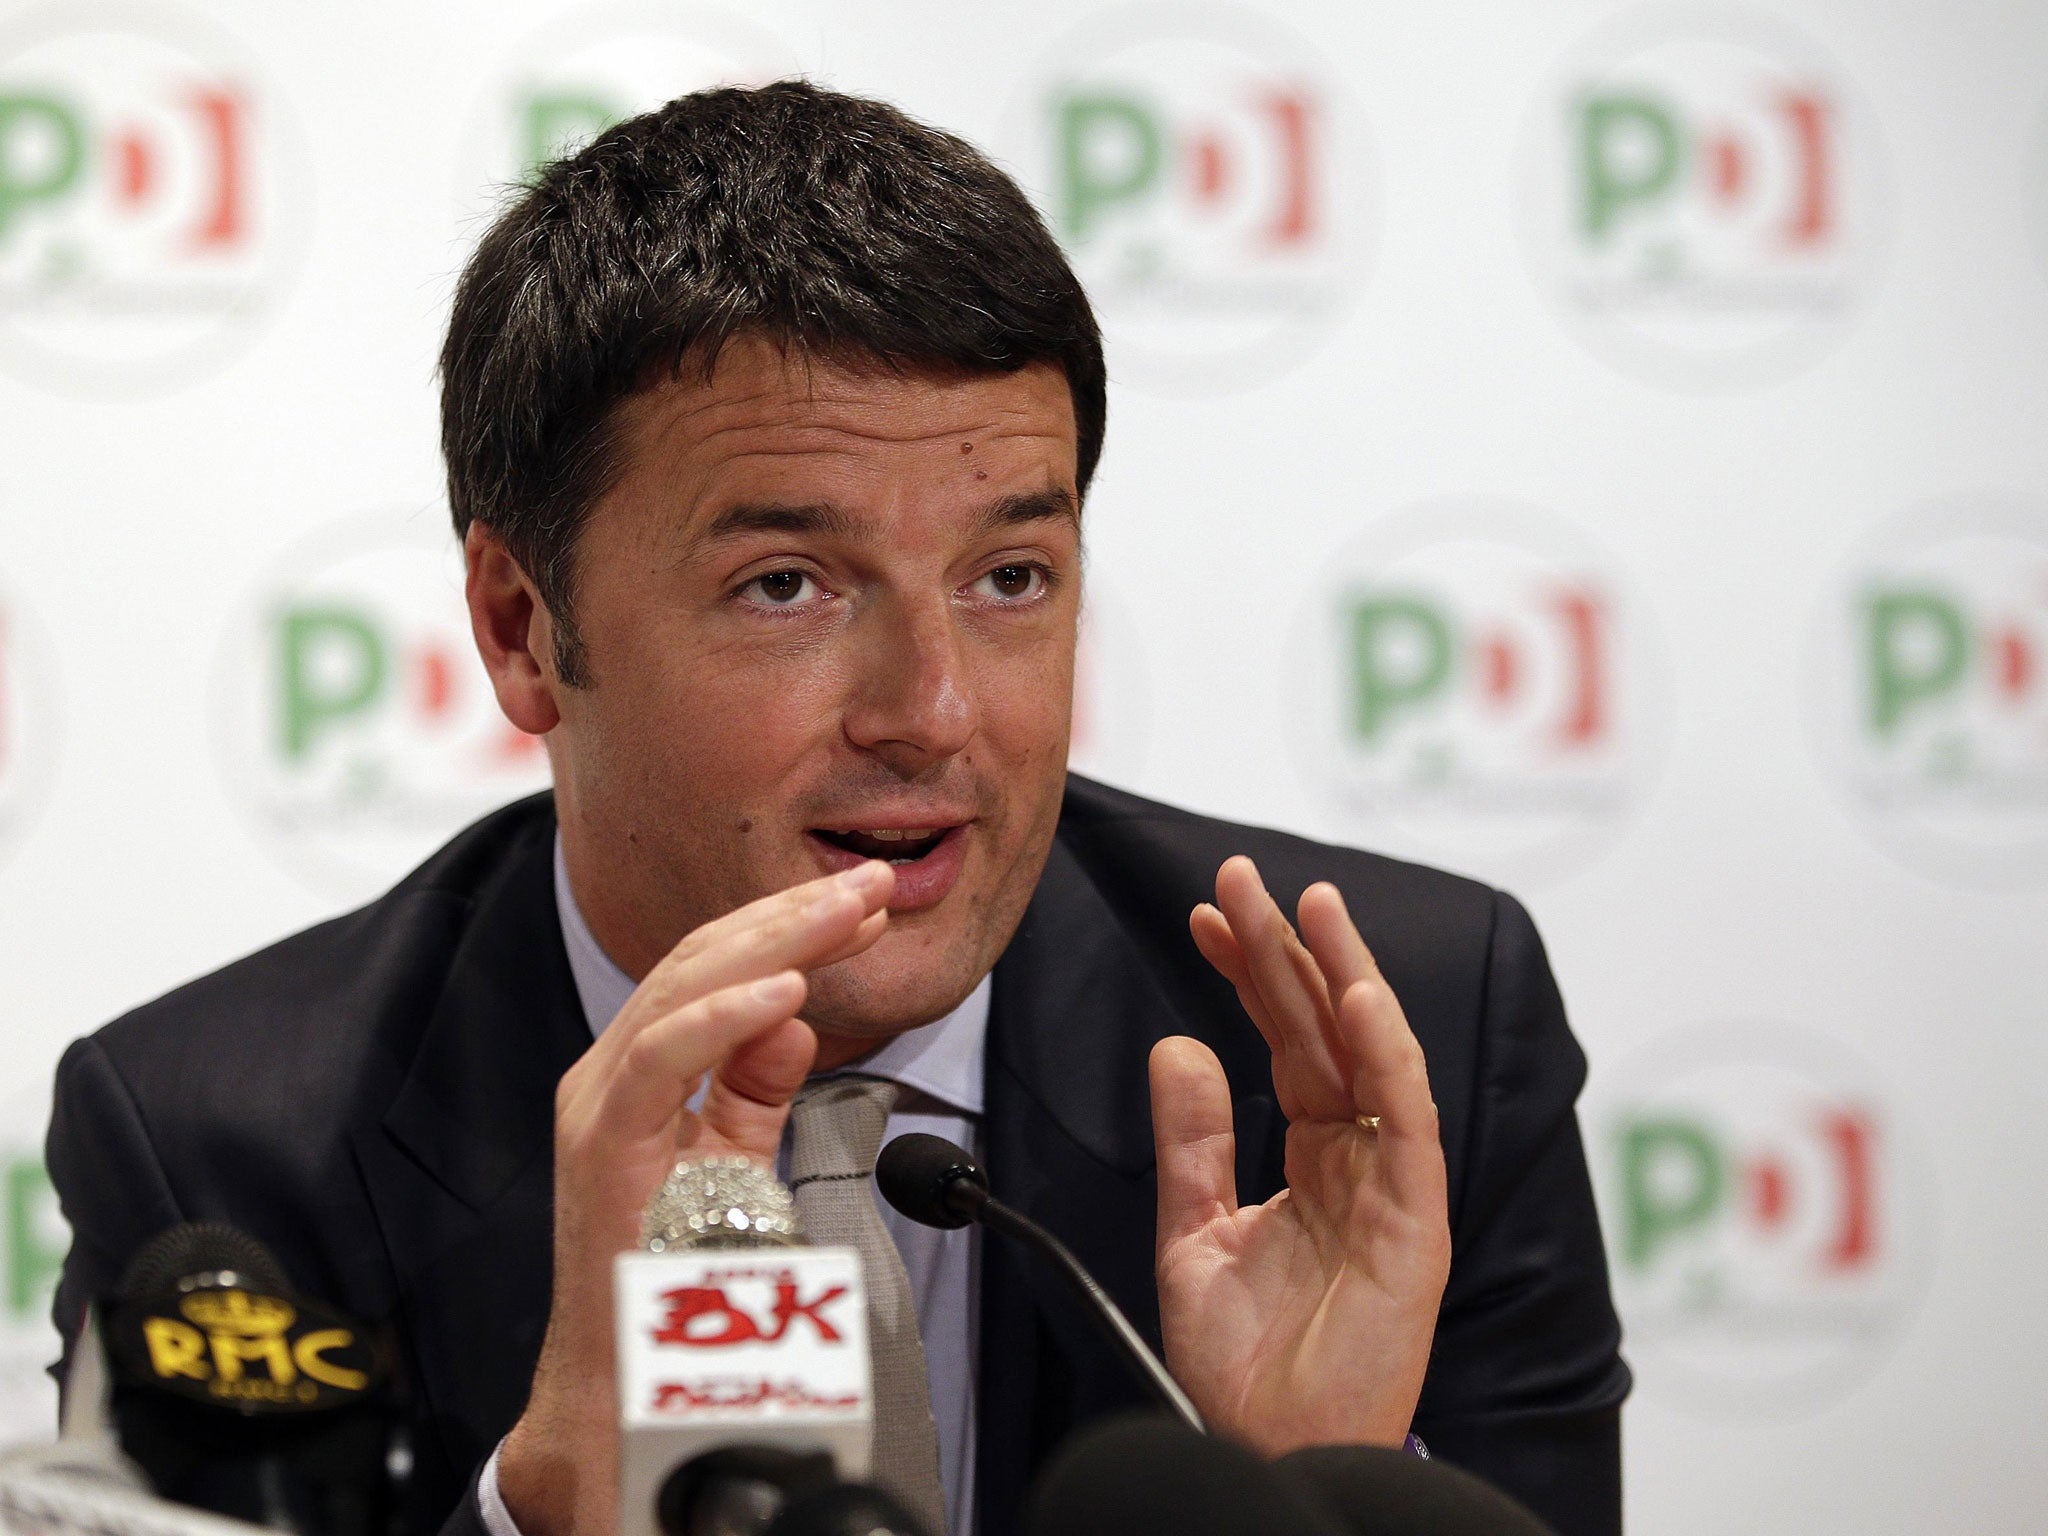 Matteo Renzi is being tipped as a new force on Italy's fractured political scene